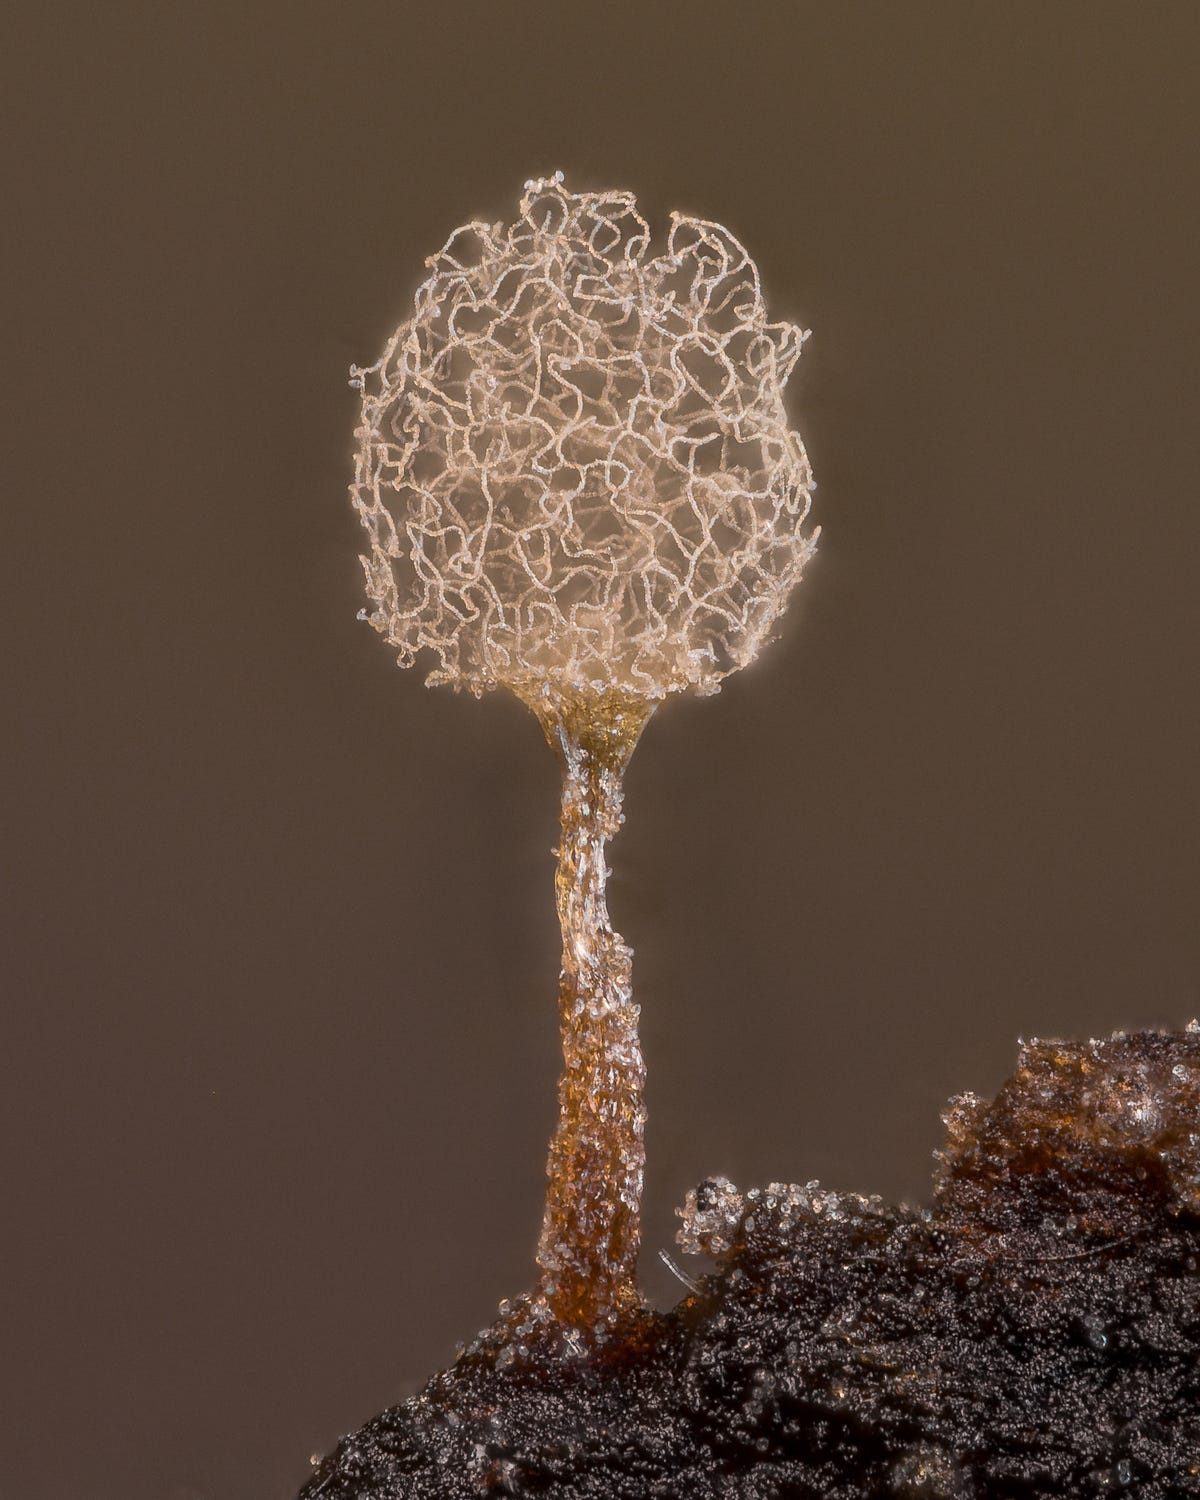 slime mold looking pretty